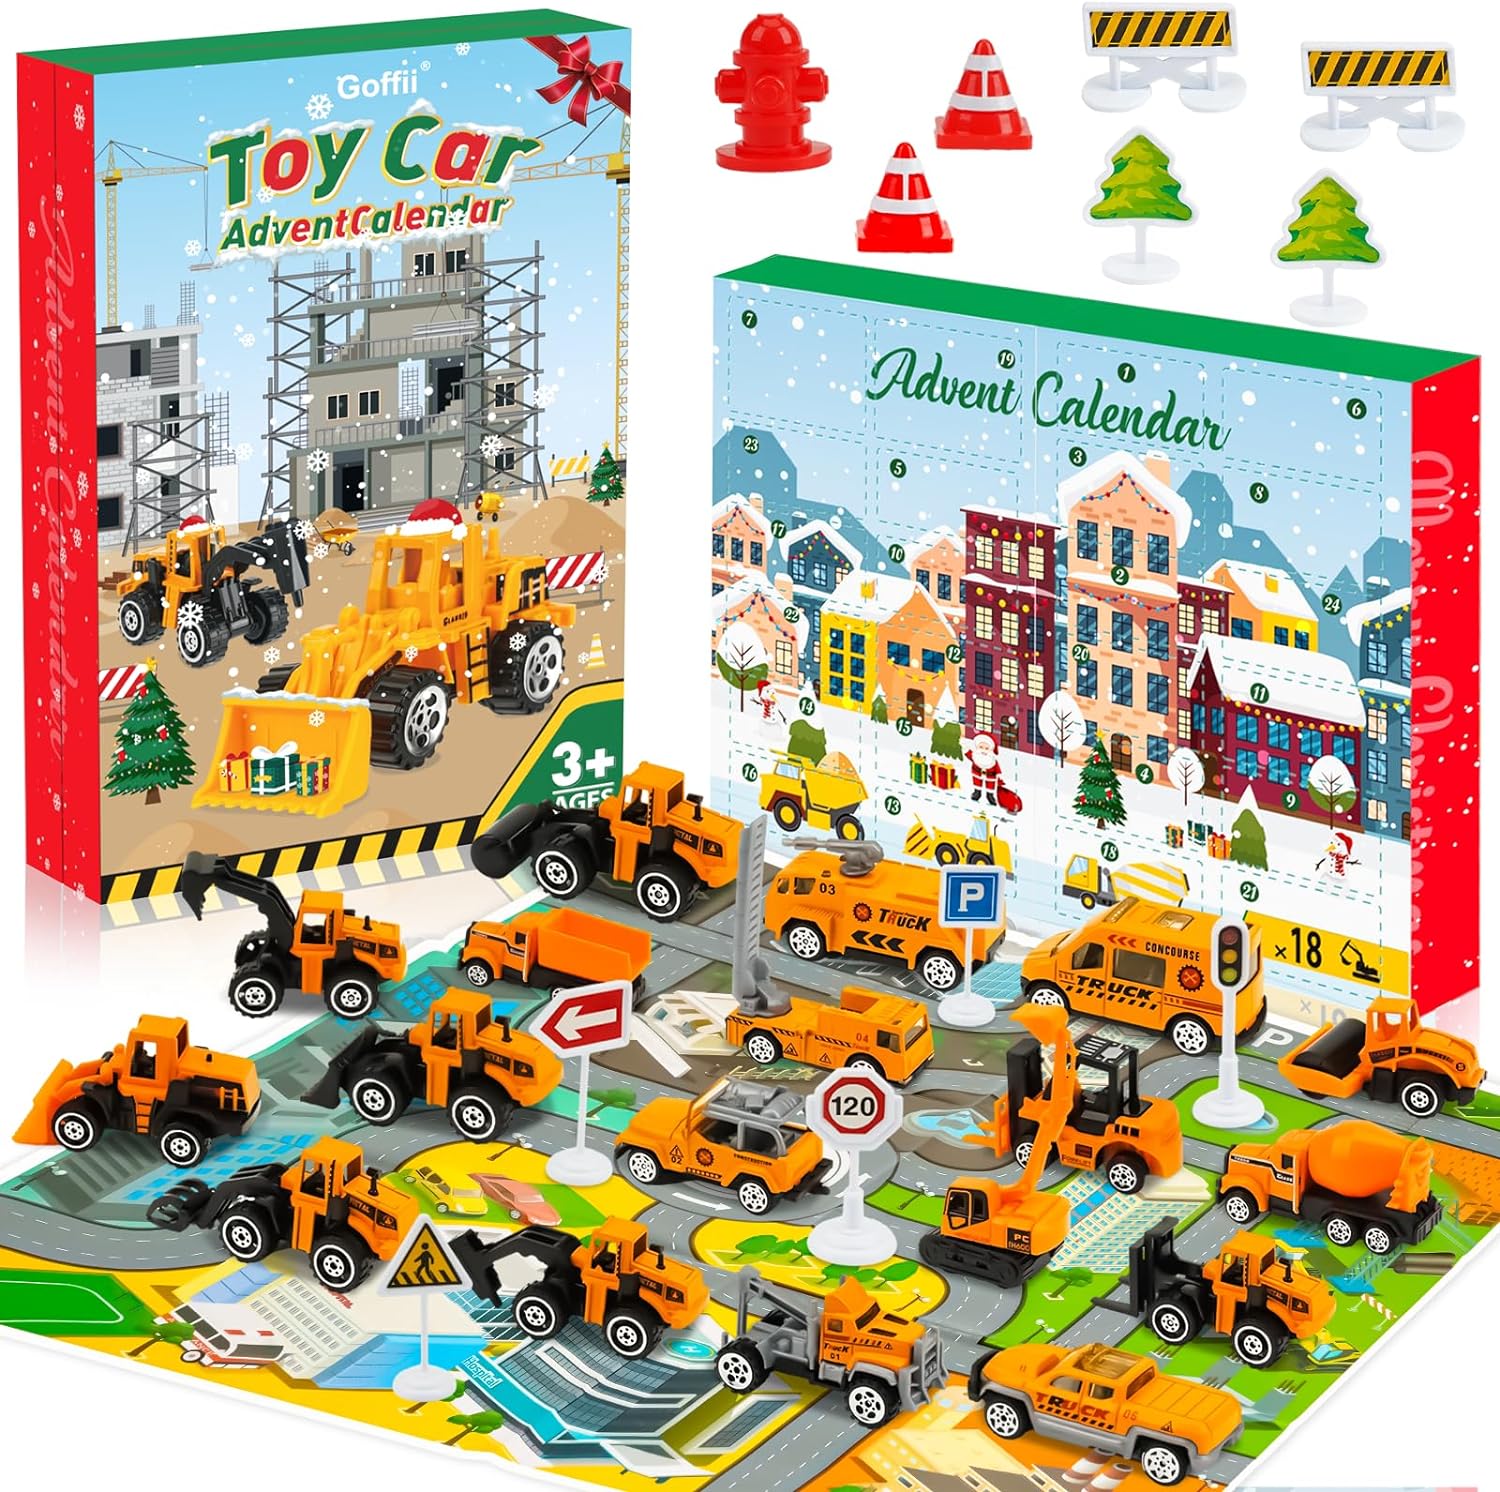 Advent Calendar Children, Advent Calendar 2023 Children's Car Toy from 3 4 5 6 Years Boys Girls Children Christmas Calendar 2023 Christmas Gifts for Filling Construction Site Vehicle Gift for Children
